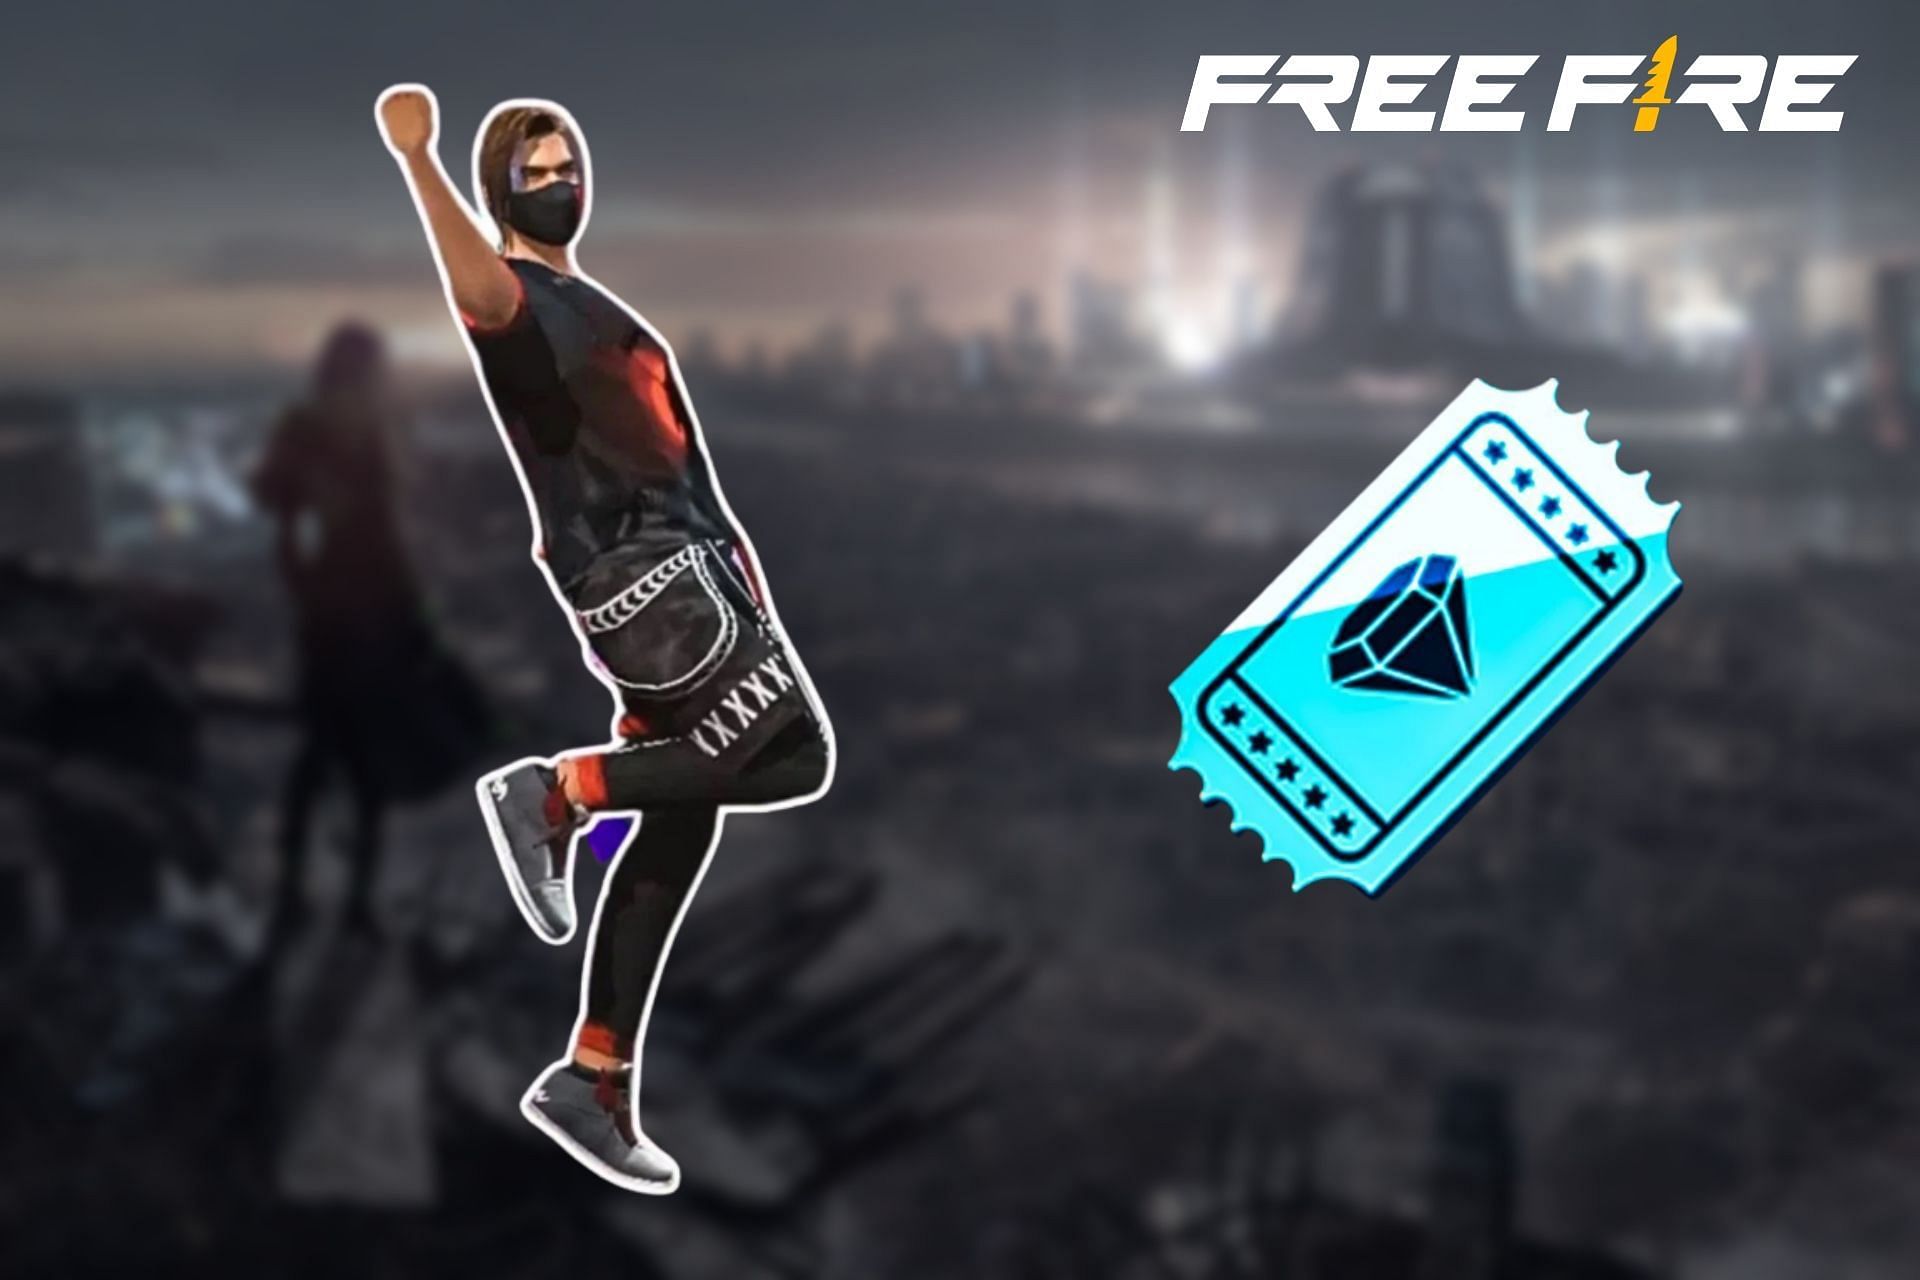 Free Fire redeem codes give free-to-players a chance to get exclusive rewards (Image via Sportskeeda)